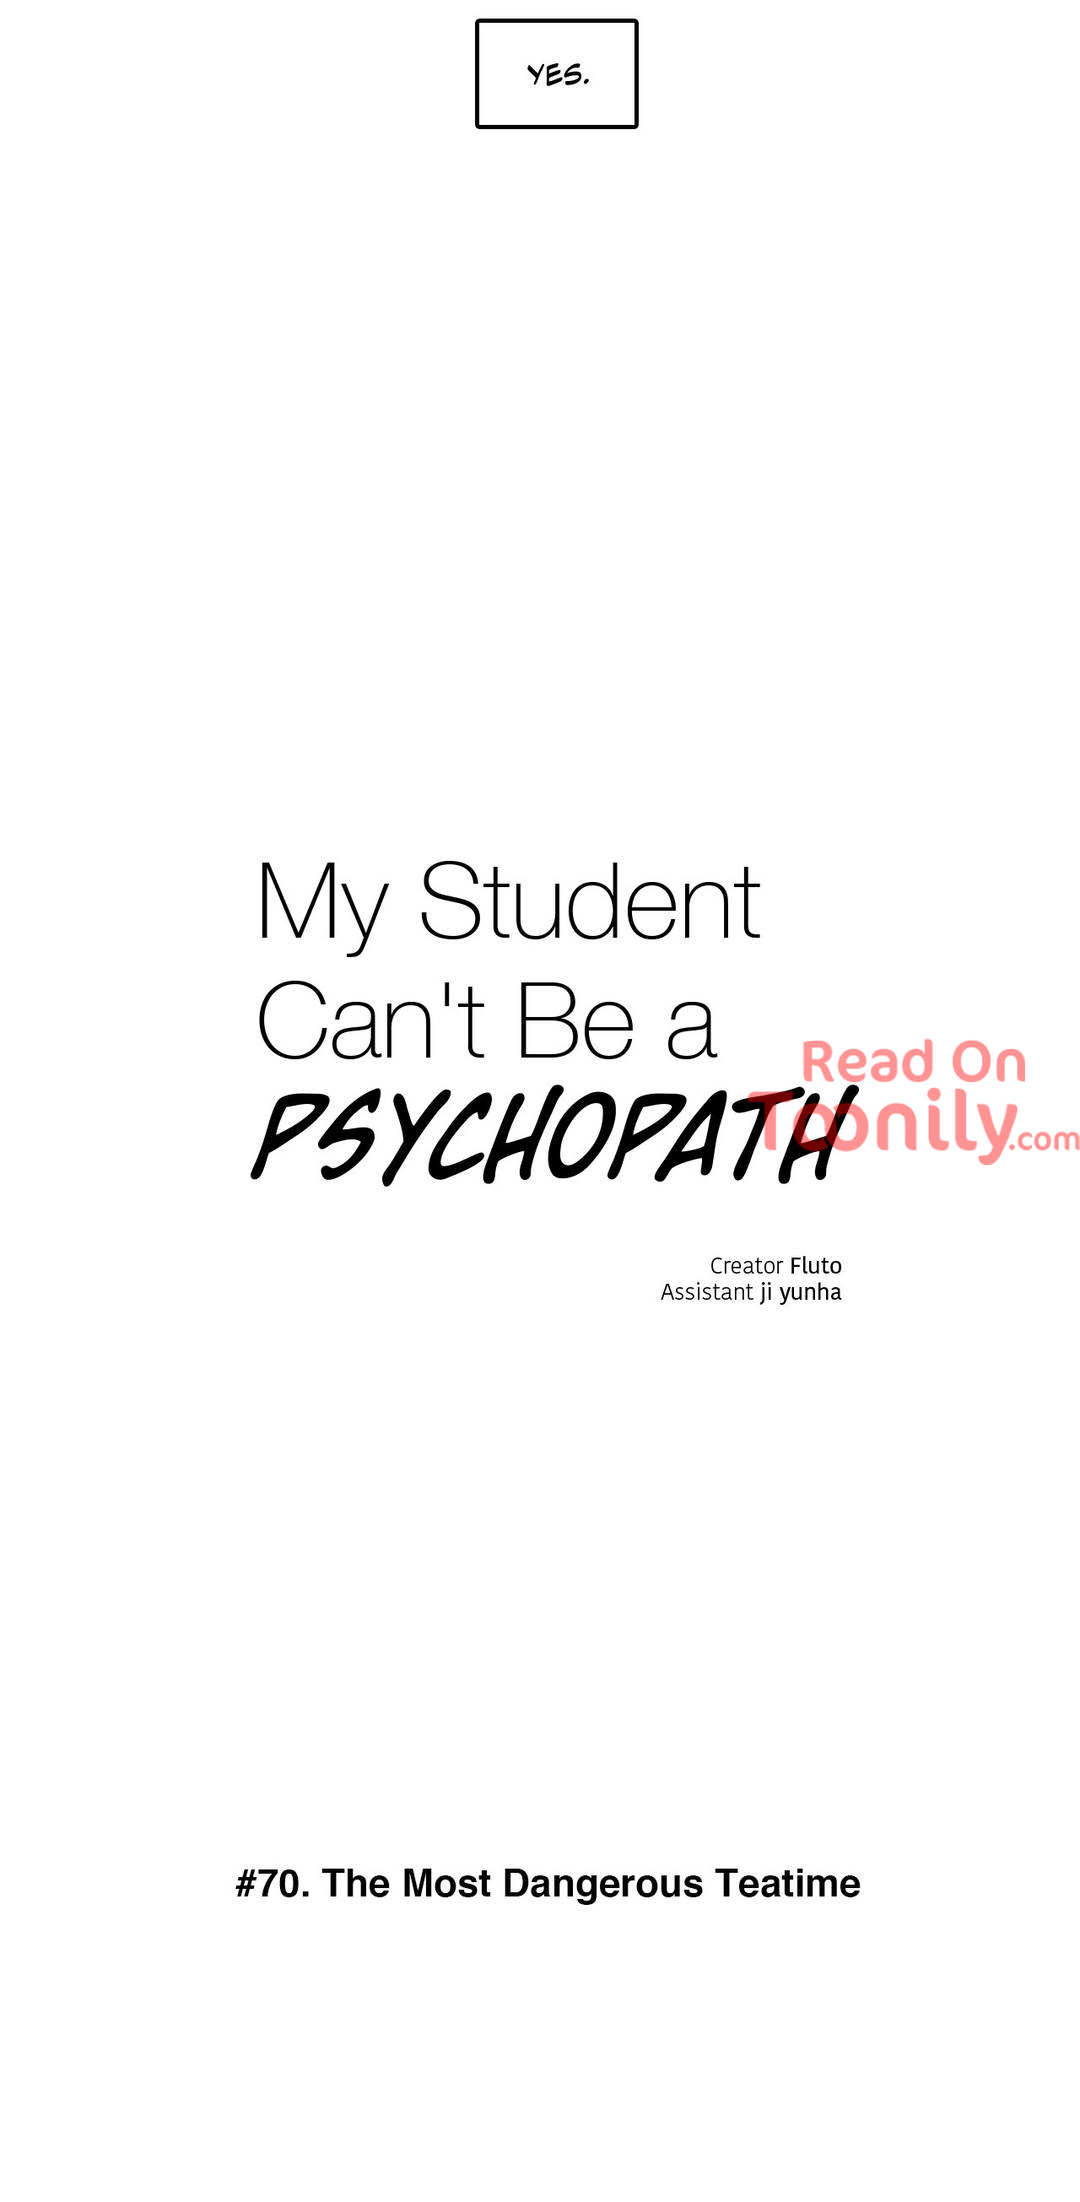 My Student Can’t Be a Psychopath image